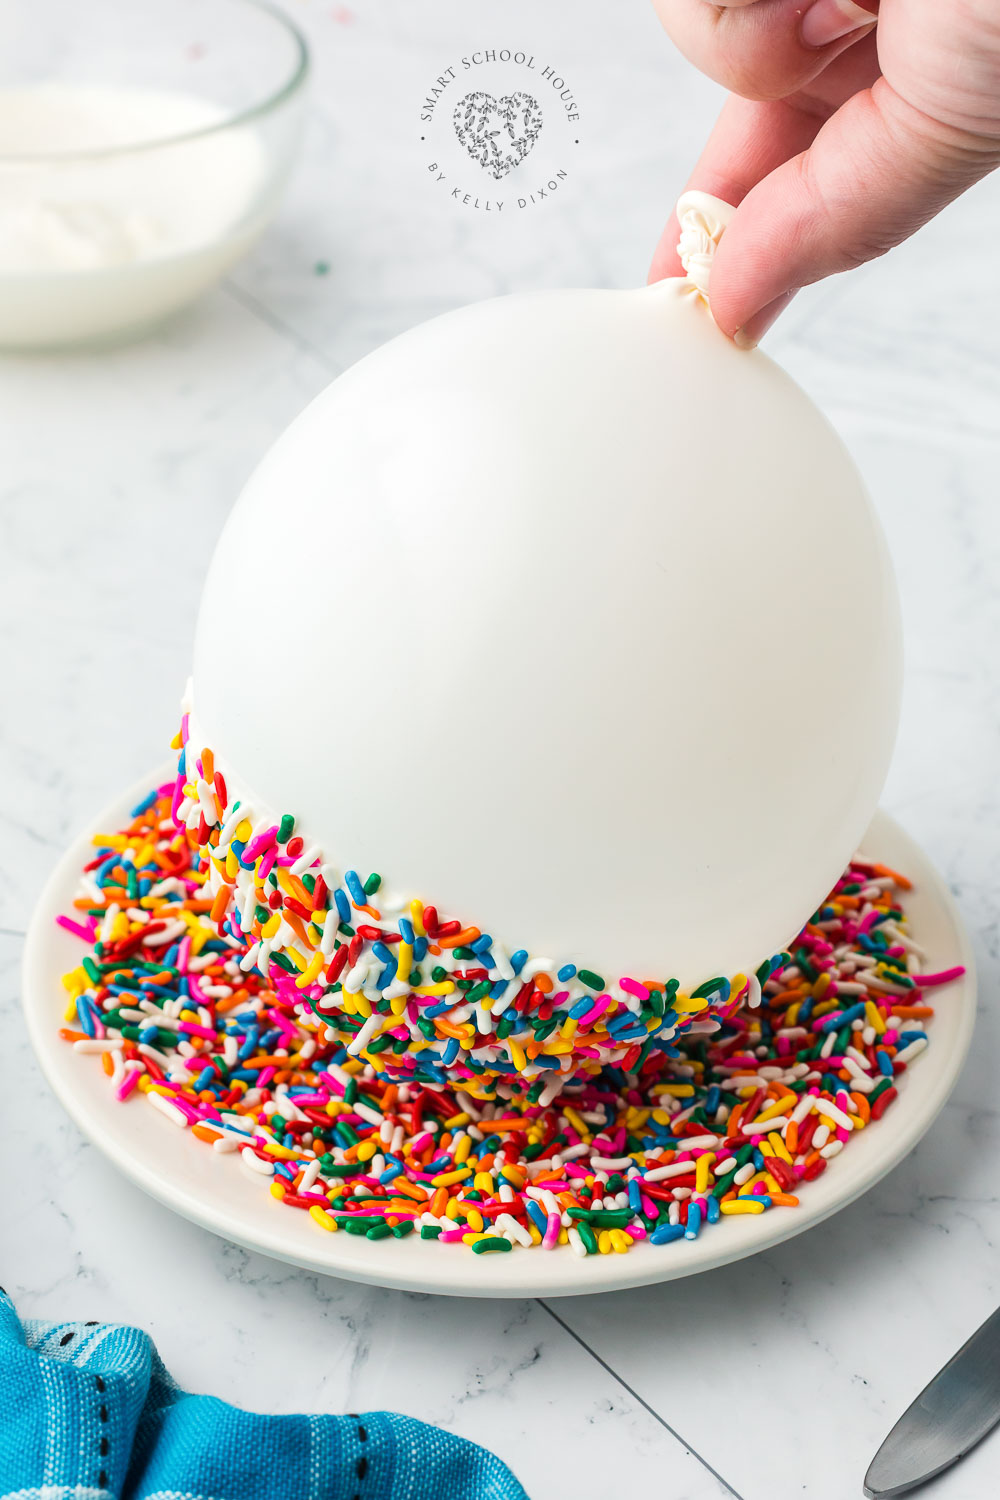 Dipping a balloon into chocolate and sprinkles